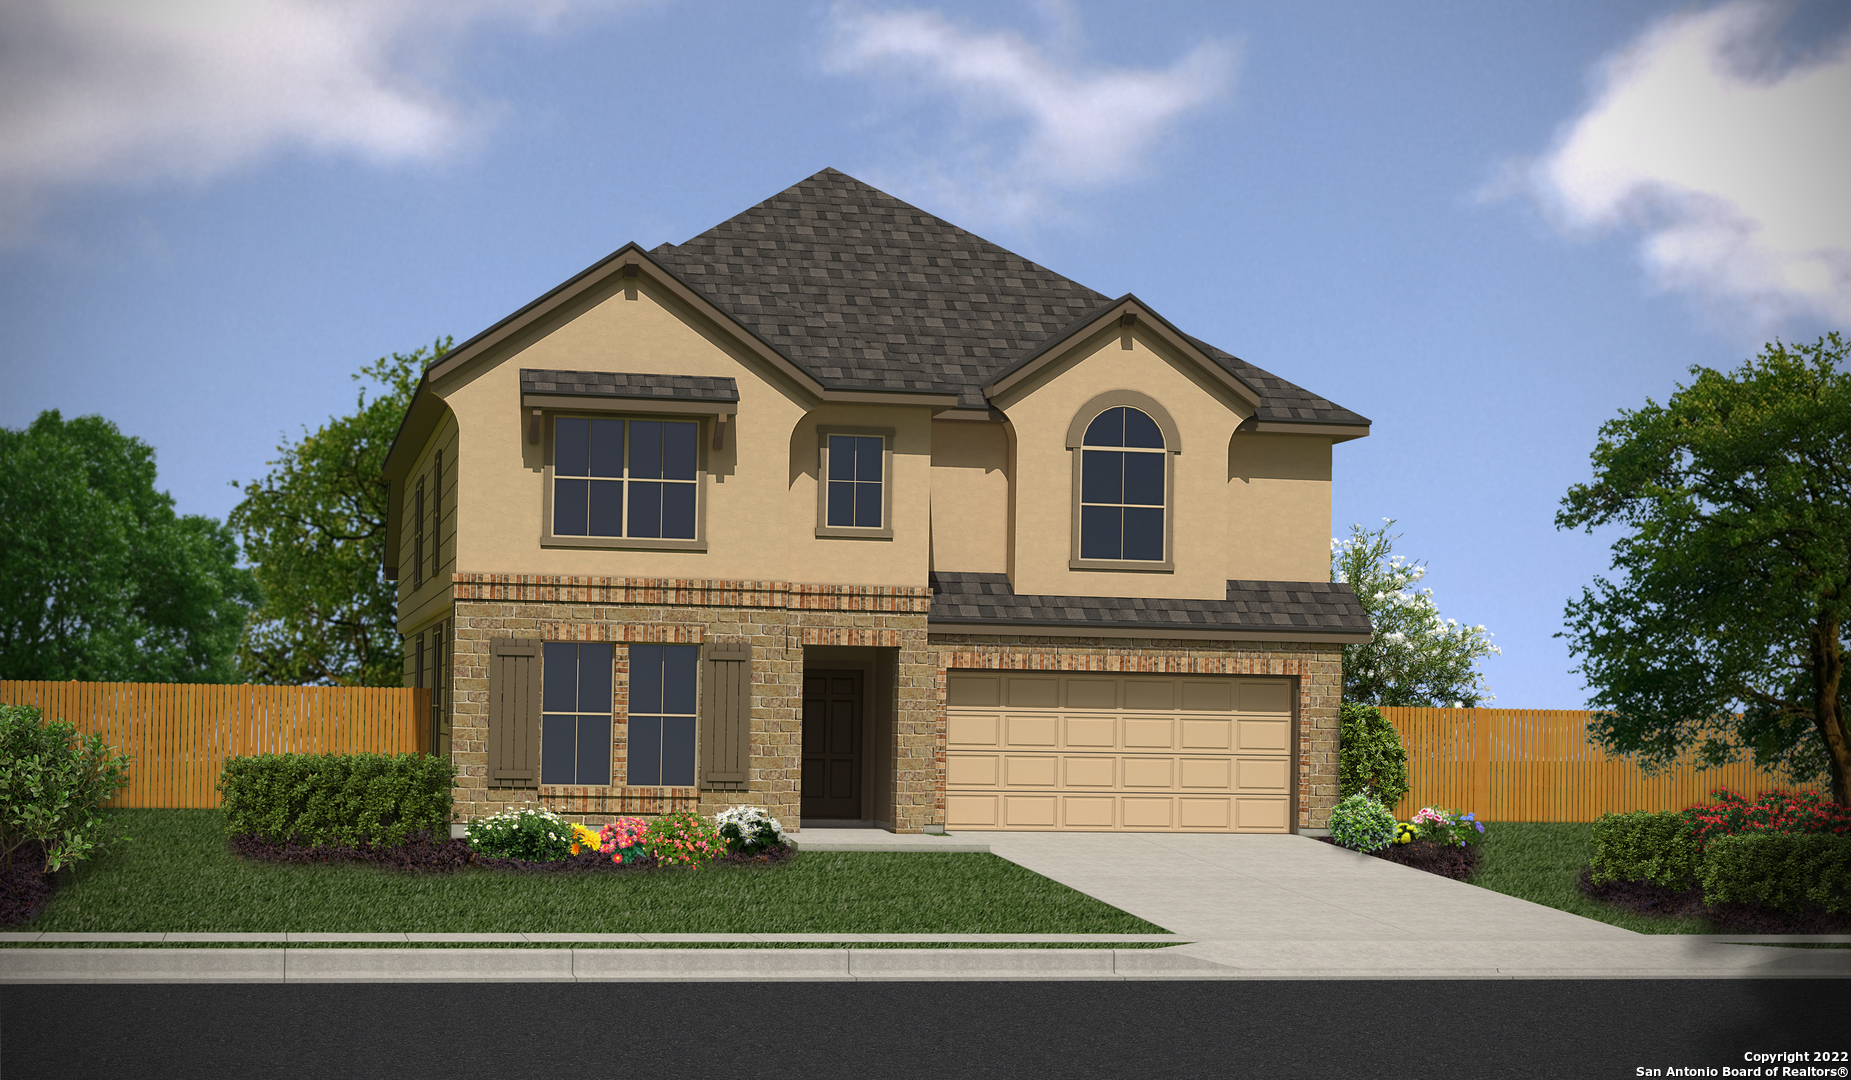 Love where you live in Venado Crossing in Cibolo, TX! The Atalon floor plan is a stunning 2-story home with 5 bedrooms, 3.5 bathrooms, and a 2-car garage. This home has it all, including a formal dining room, study, and both game AND media rooms! The gourmet kitchen is open to both the breakfast and family rooms and features stainless steel appliances and a large island! Retreat to the Owner's Suite featuring a beautiful bay window, double sinks, sizable shower with seat, and a spacious walk-in closet. Enjoy the great outdoors with a covered patio! Don't miss your opportunity to call Buffalo Crossing home, schedule a visit today! *Photos are a representation of the floor plan. Options and interior selections will vary.*